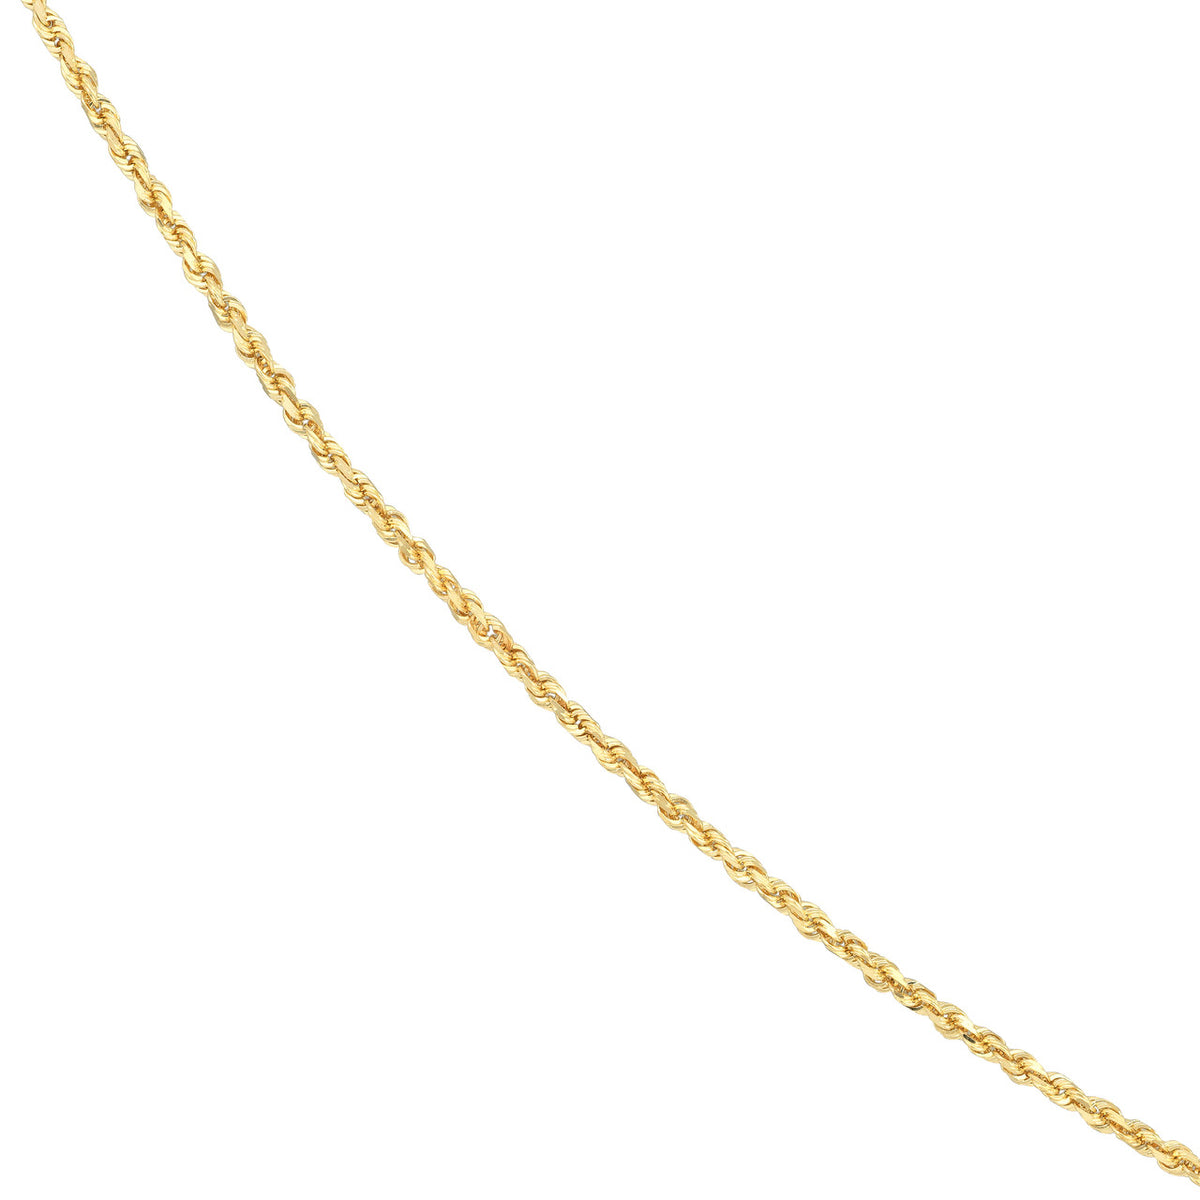 14K Yellow Gold or White Gold 1.8mm D/C Rope Chain Necklace with Lobster Lock